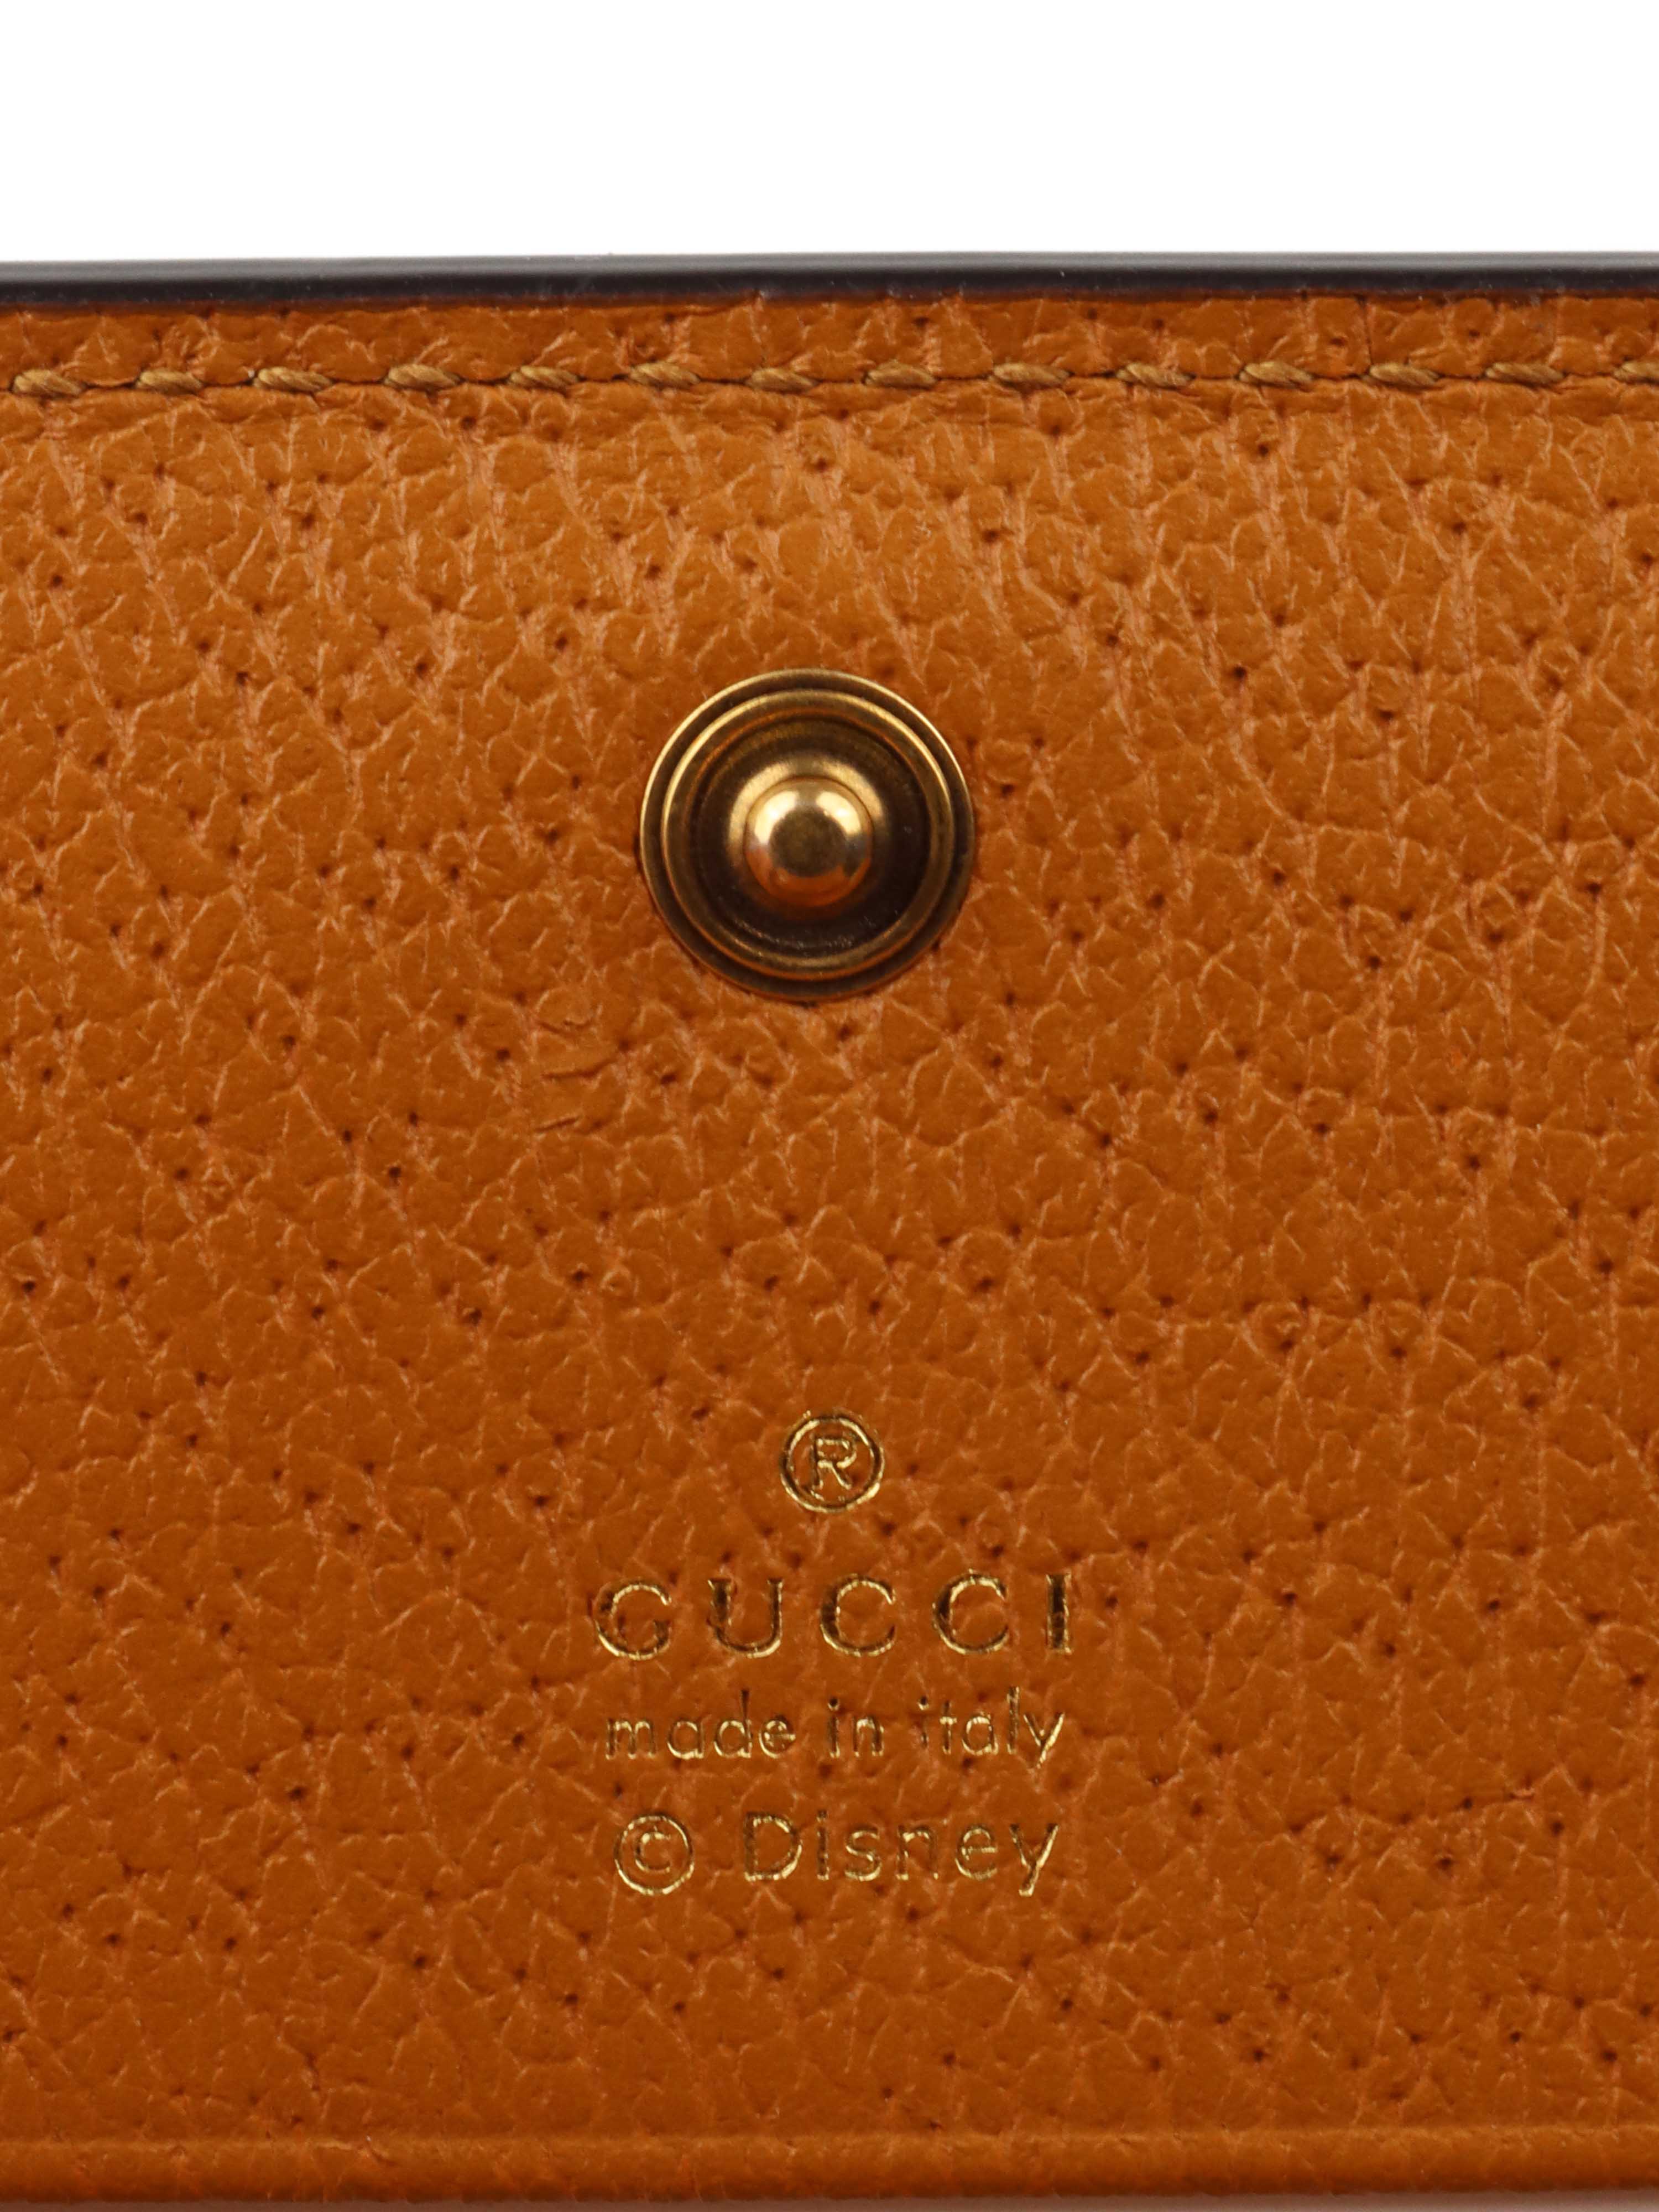 Gucci x Disney Limited Edition Mickey Mouse Wallet.